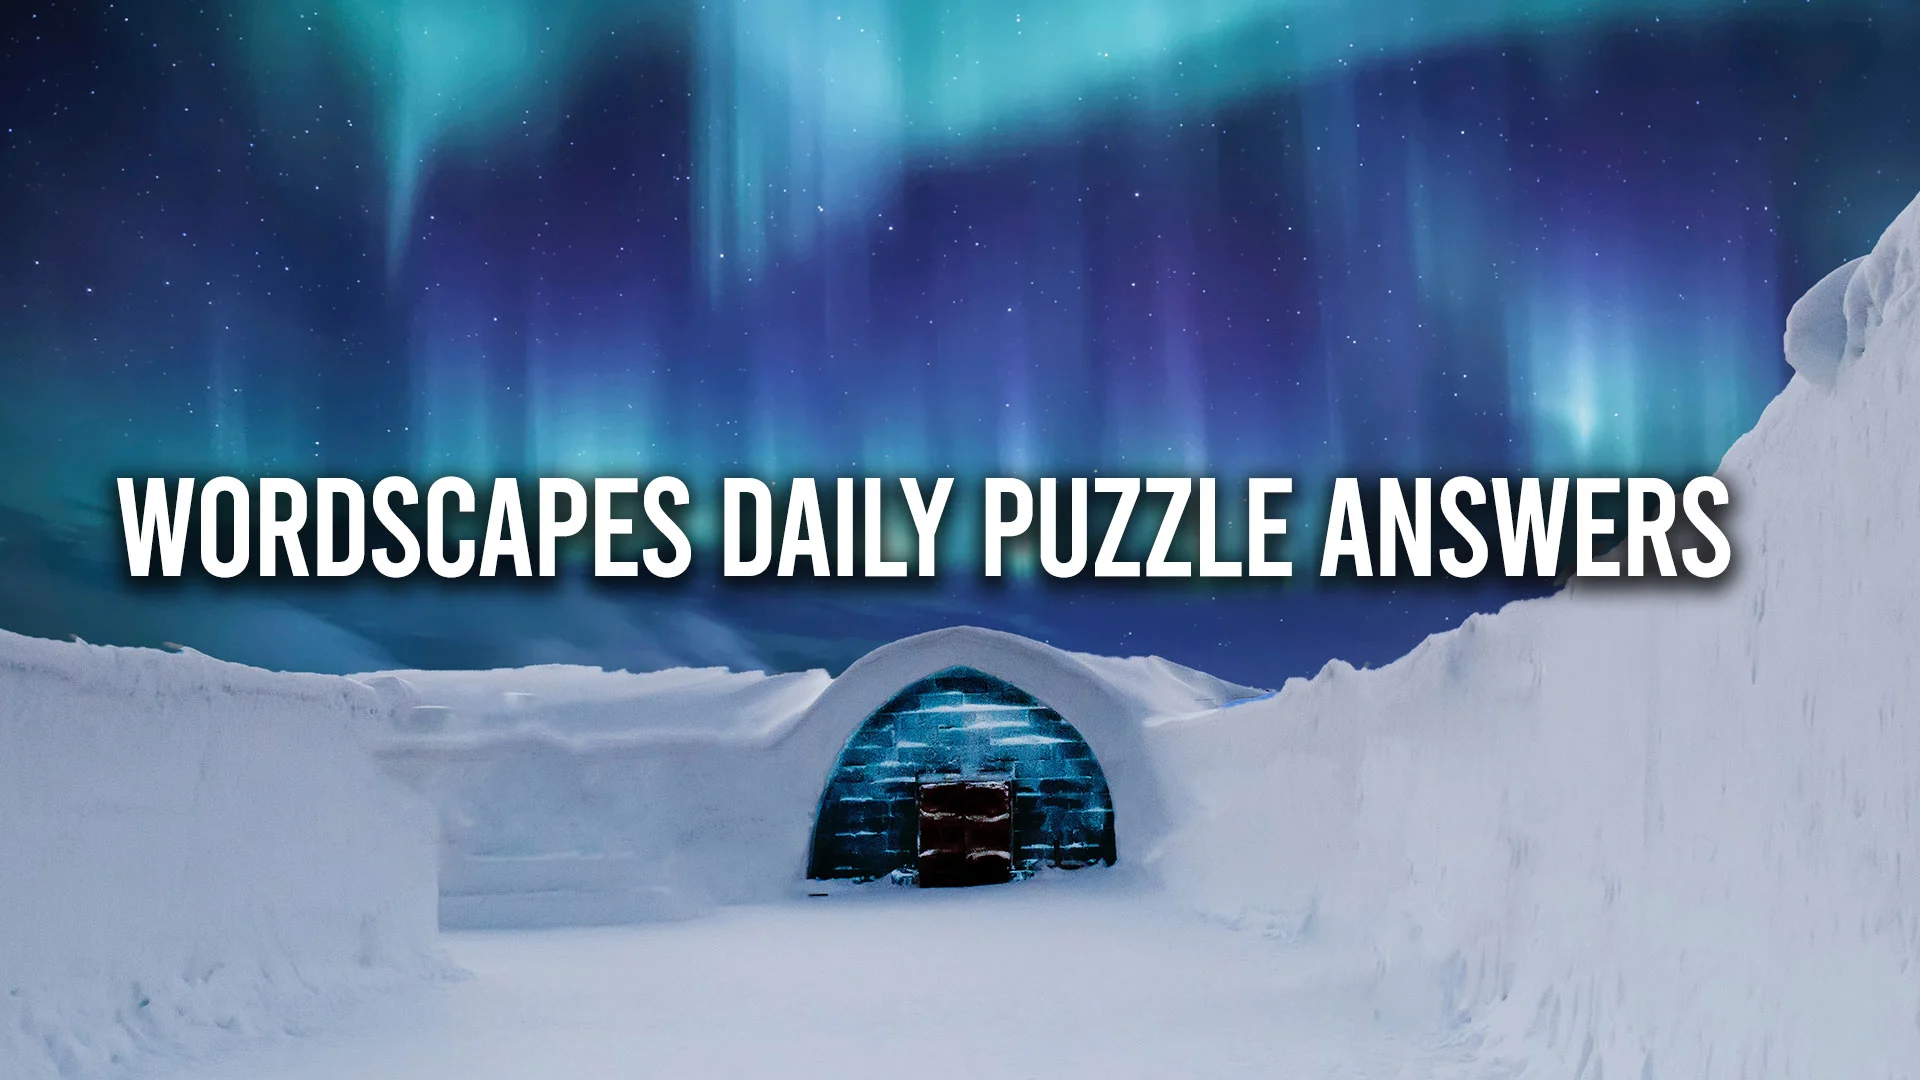 Wordscapes Daily Puzzle Answers for February 7 2023